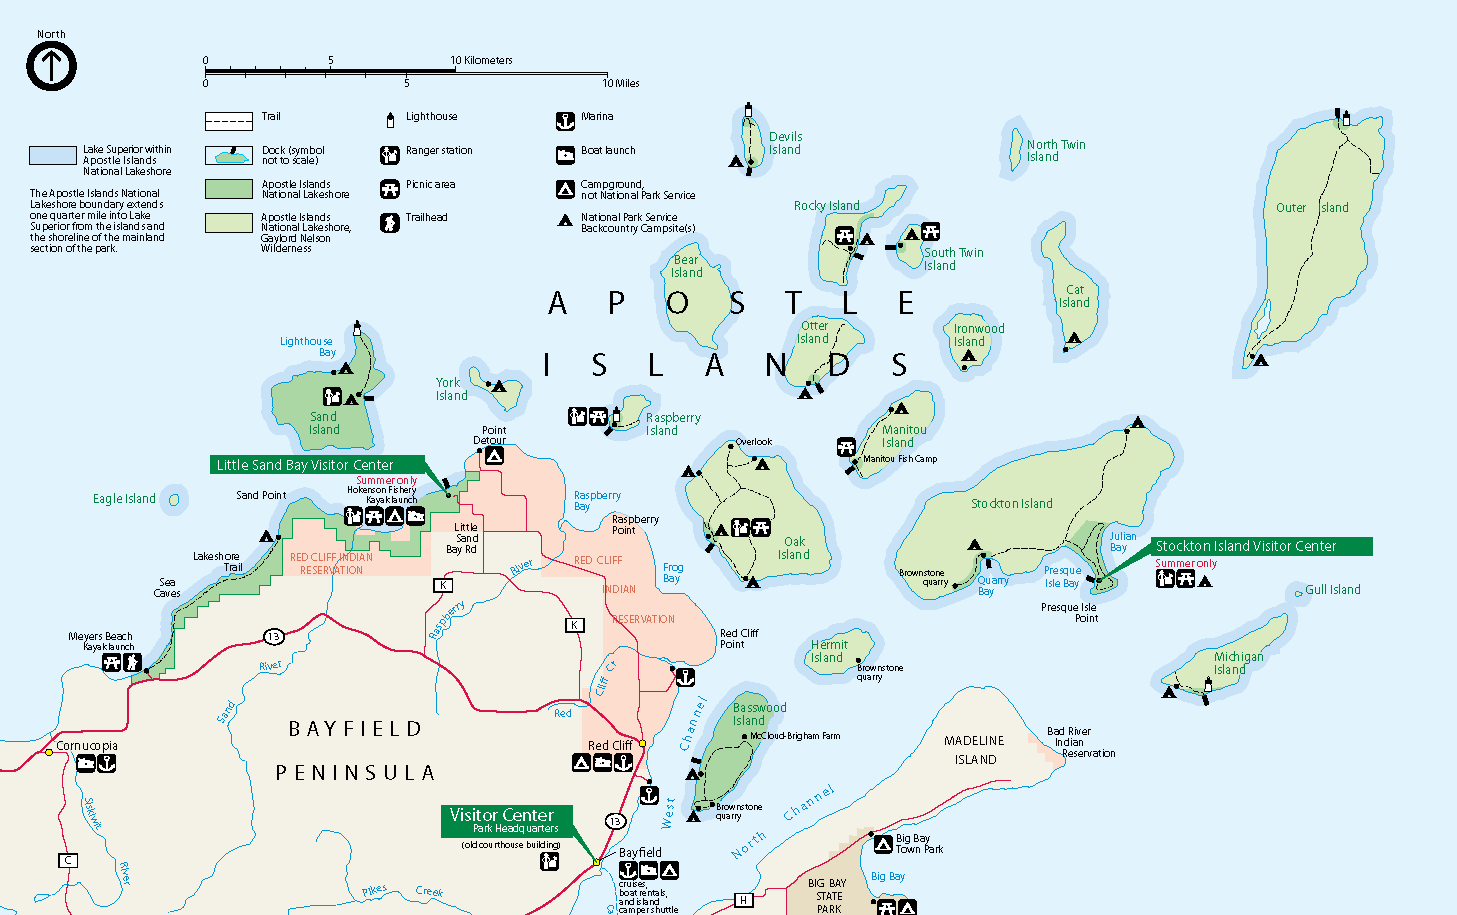  Close-Up Map of the Apostle Islands  (from the   National Park Service )   